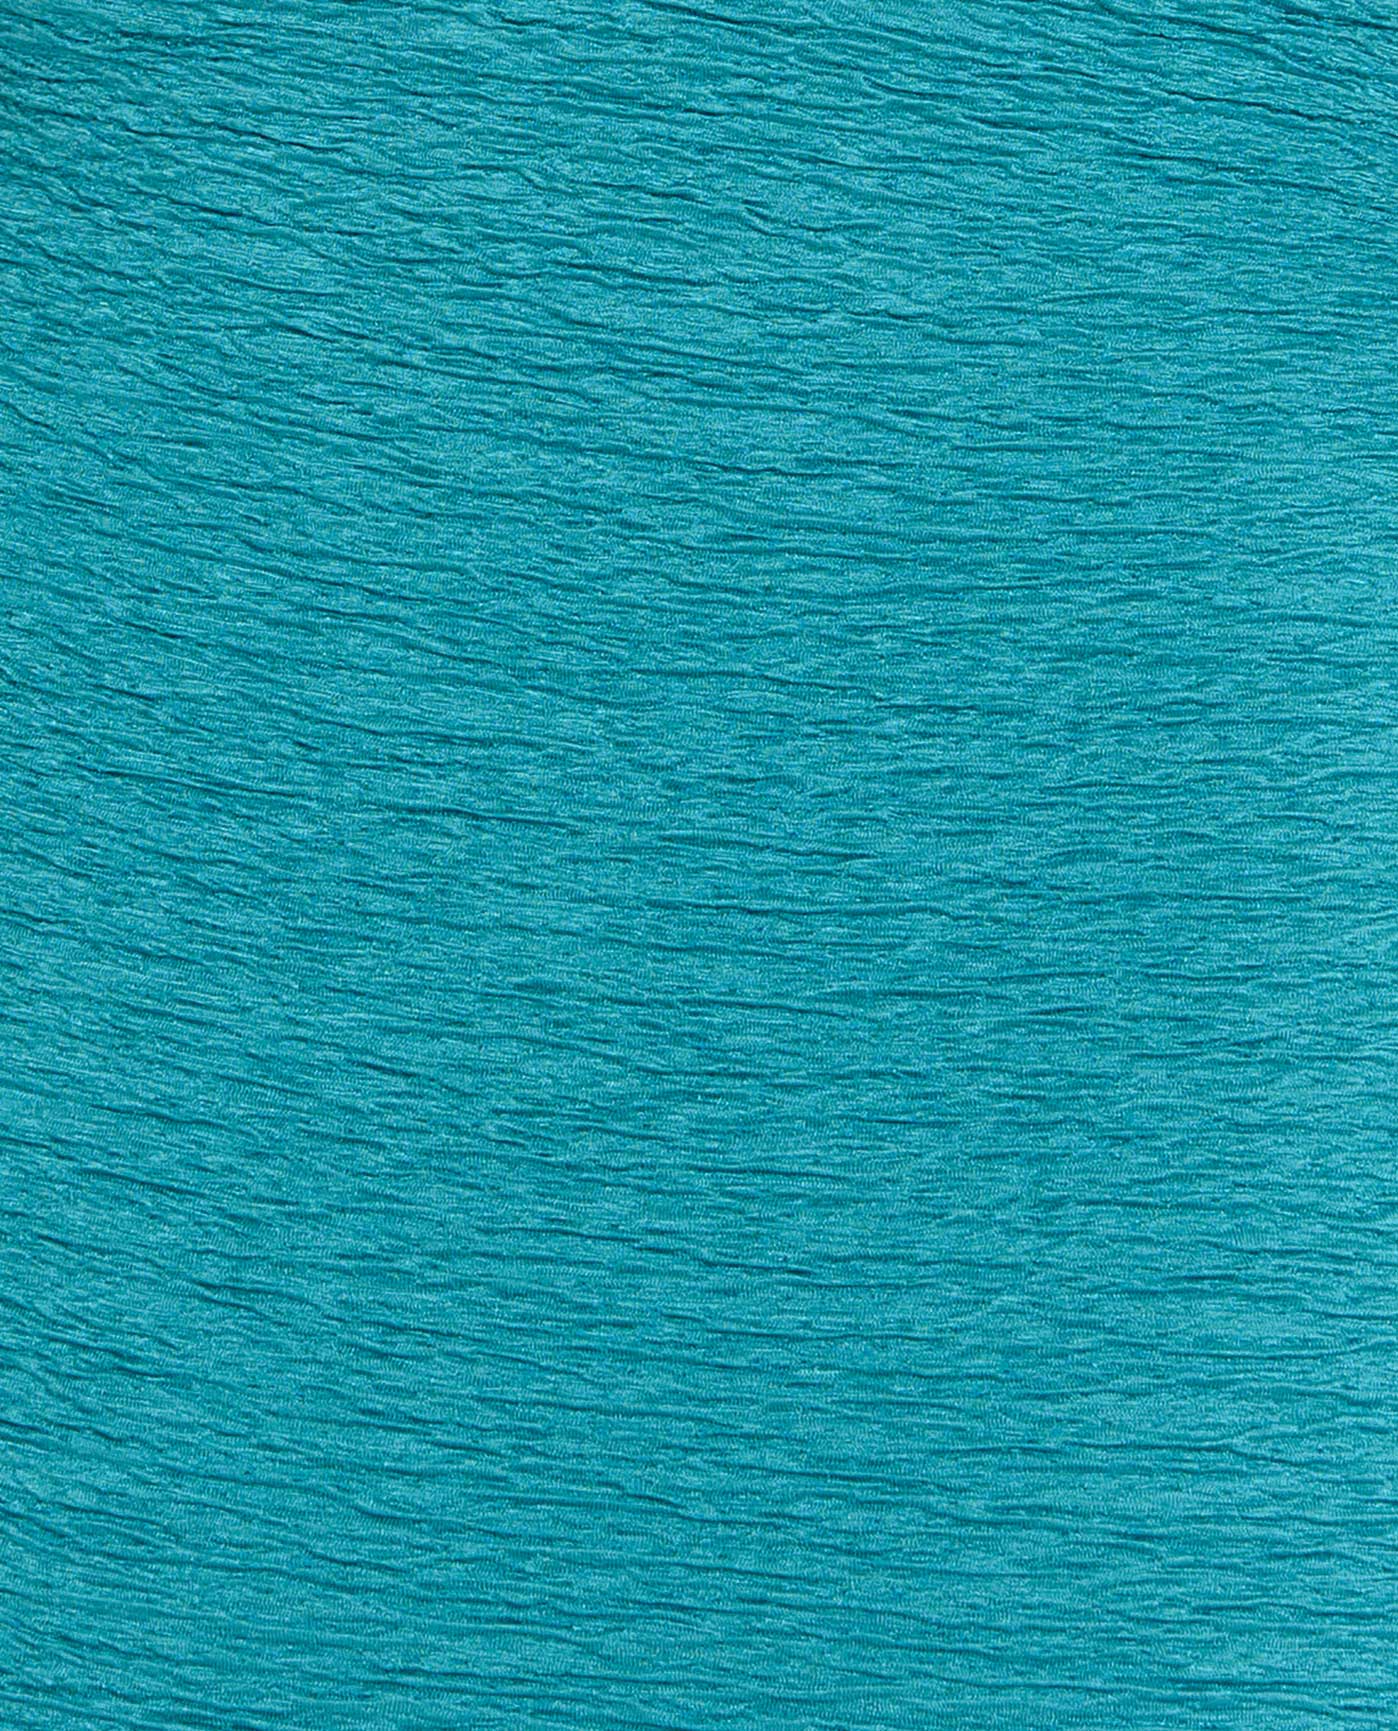 FABRIC SWATCH VIEW OF CHLORINE RESISTANT KRINKLE TEXTURED SOLID TWIST FRONT ONE PIECE | KRINKLE ARUBA